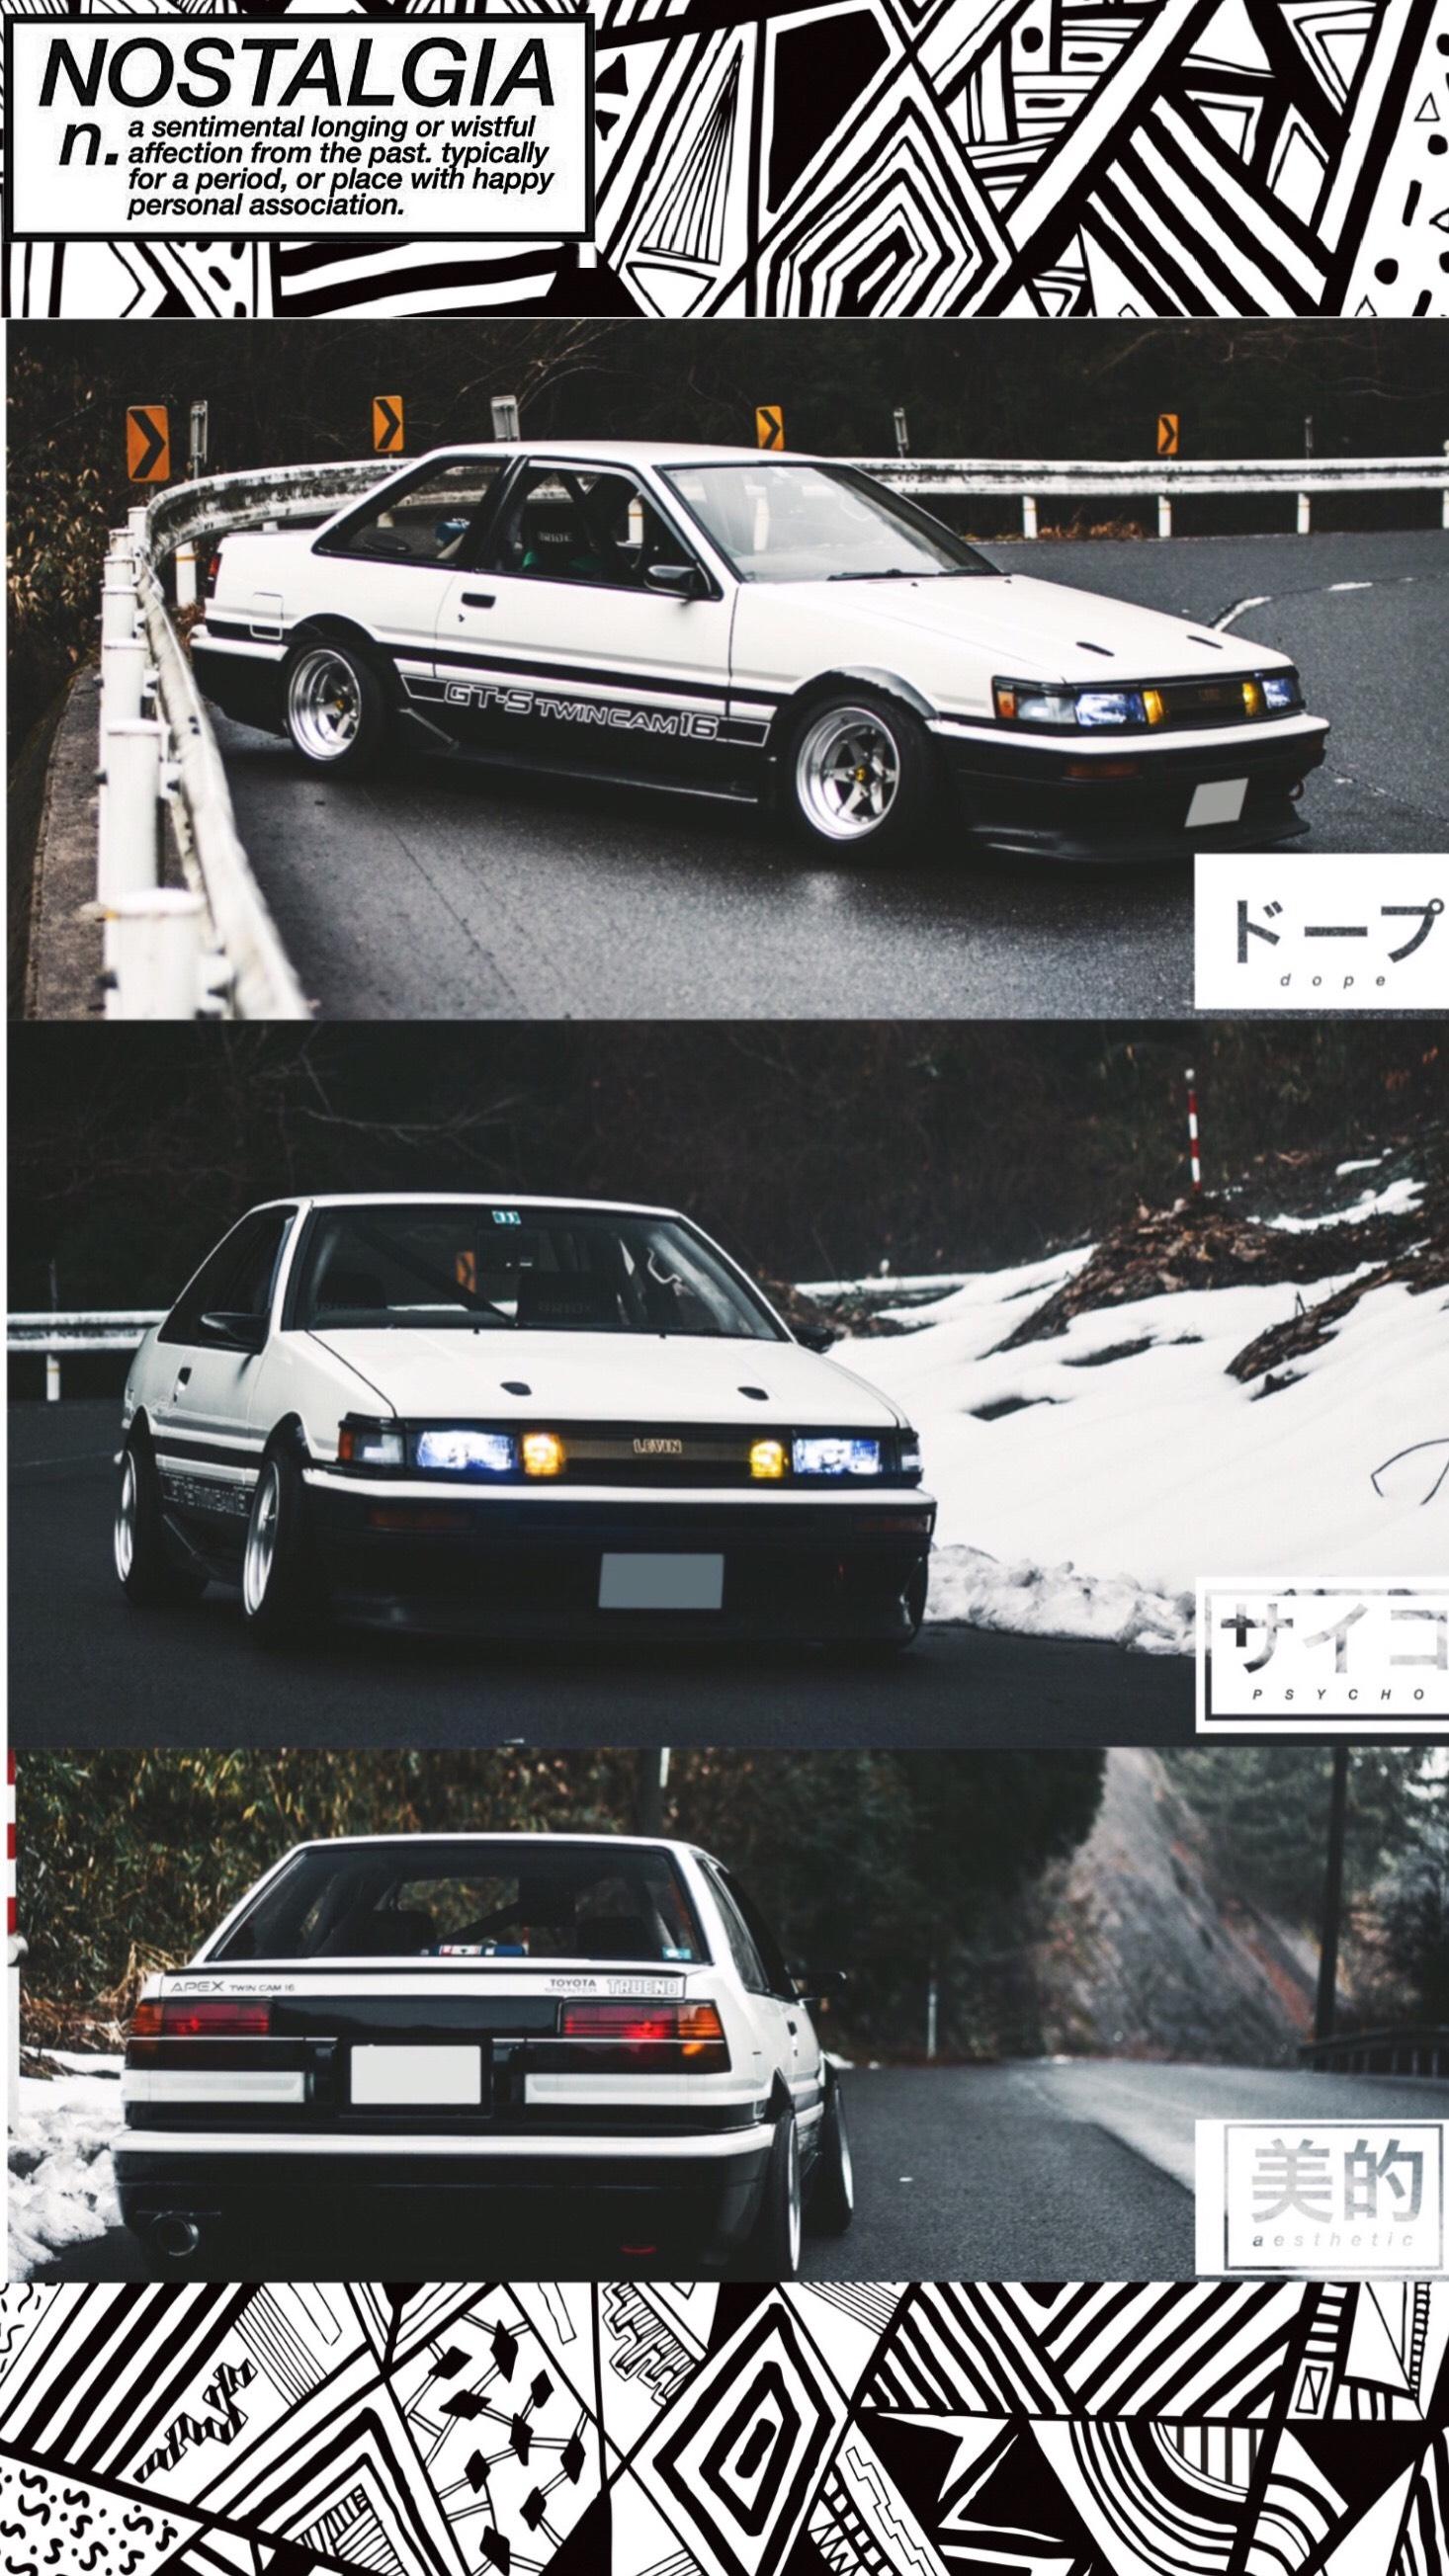 Hey guys. Here's my AE86 Levin wallpaper for iPhone I made